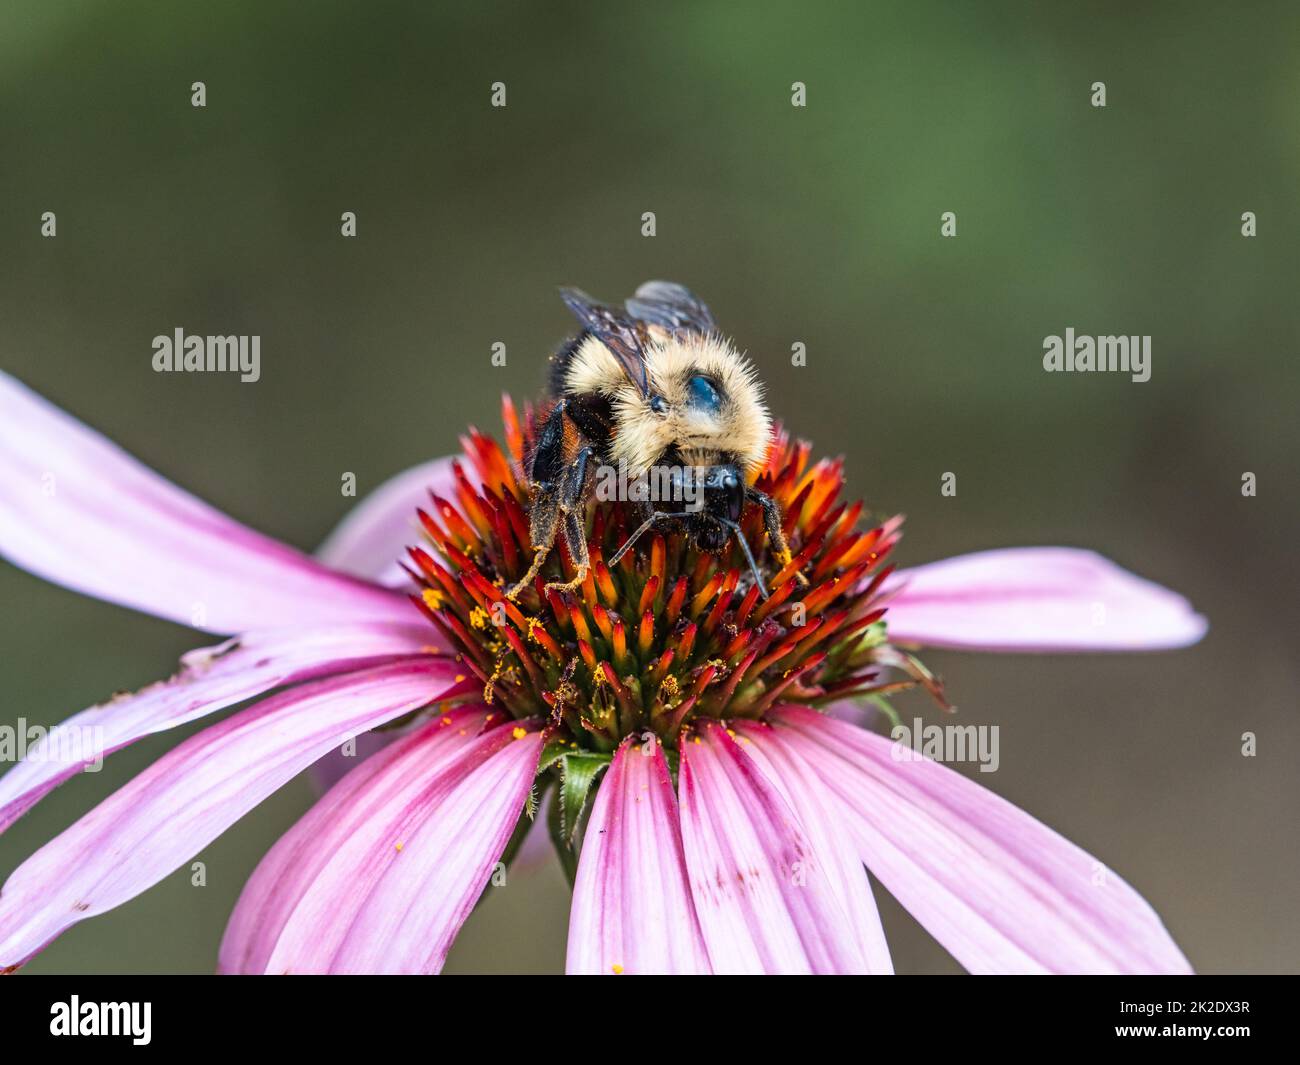 A western Honey Bee, Apis mellifera, on a large lavender daisy type flower in Fish Hatchery Trail County Park, Hayward, Wisconsin. Stock Photo